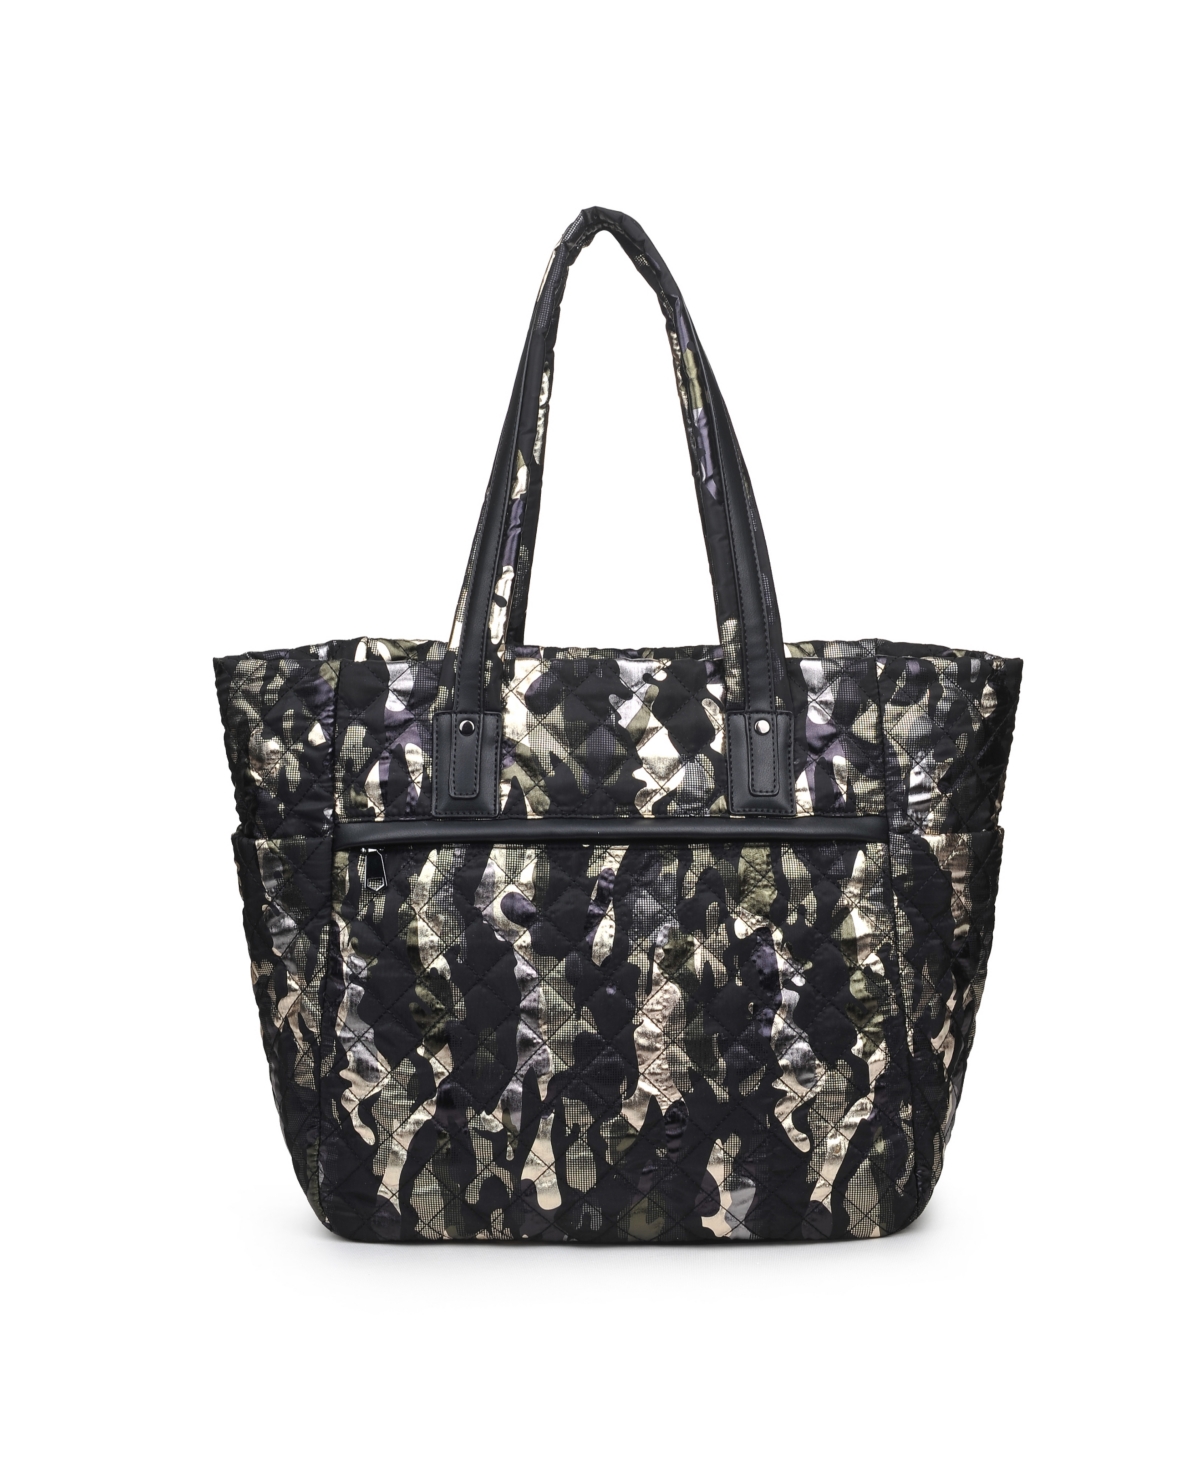 Women's No Filter Quilted Tote Bag - Denim Multi